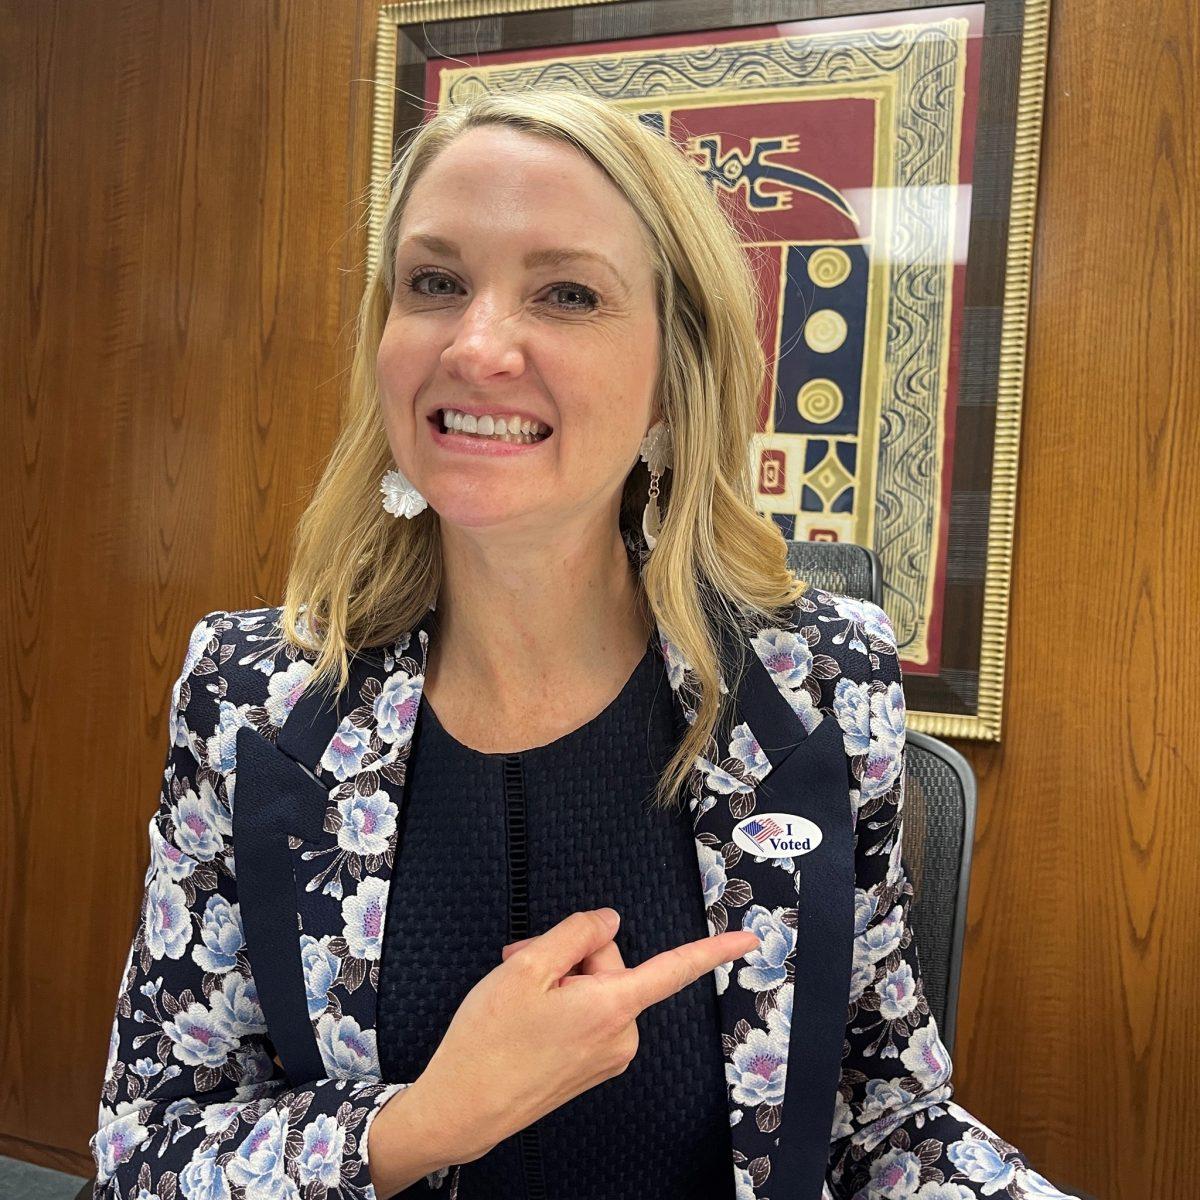 Mayor of Fort Worth Mattie Parker with a voting sticker on May 7, 2022.